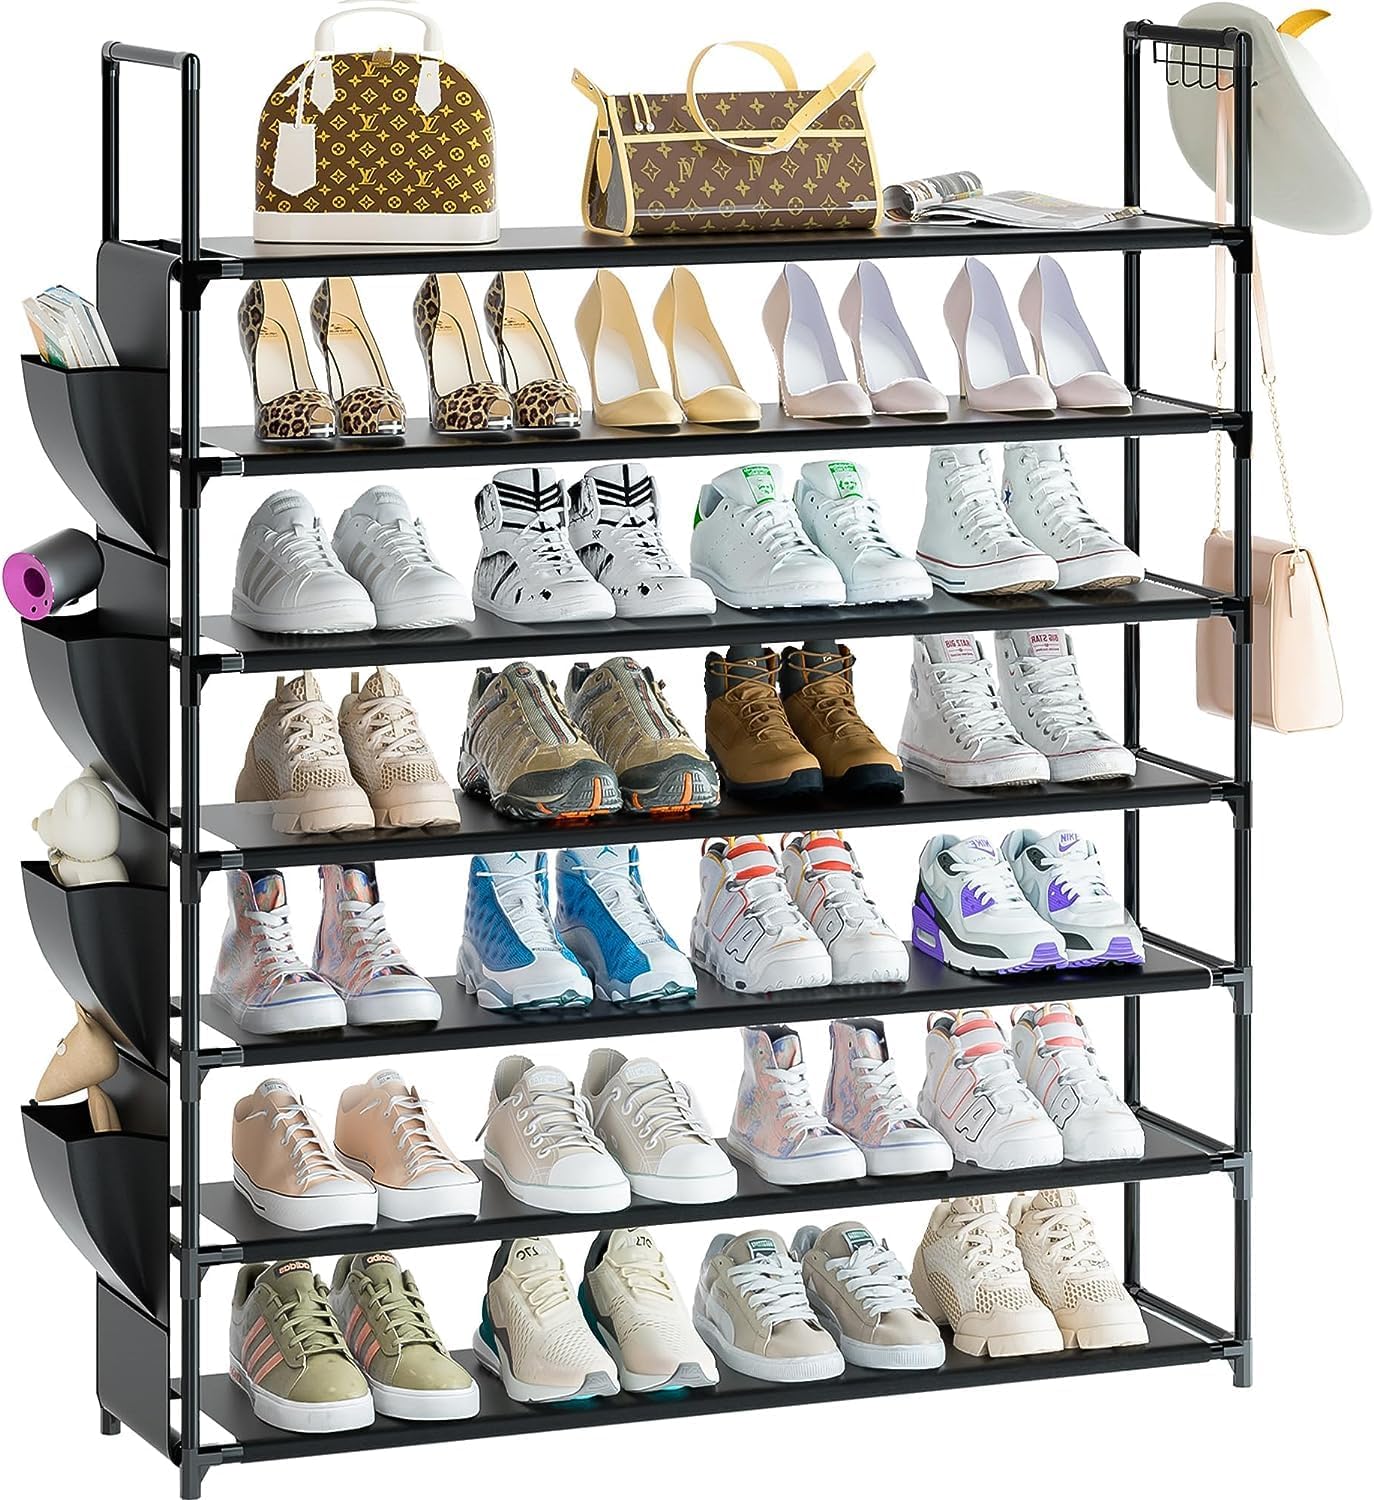 Hottest Amazon Deal Today! OYREL Large Capacity 7 Tier Shoe Rack - Save 20%!